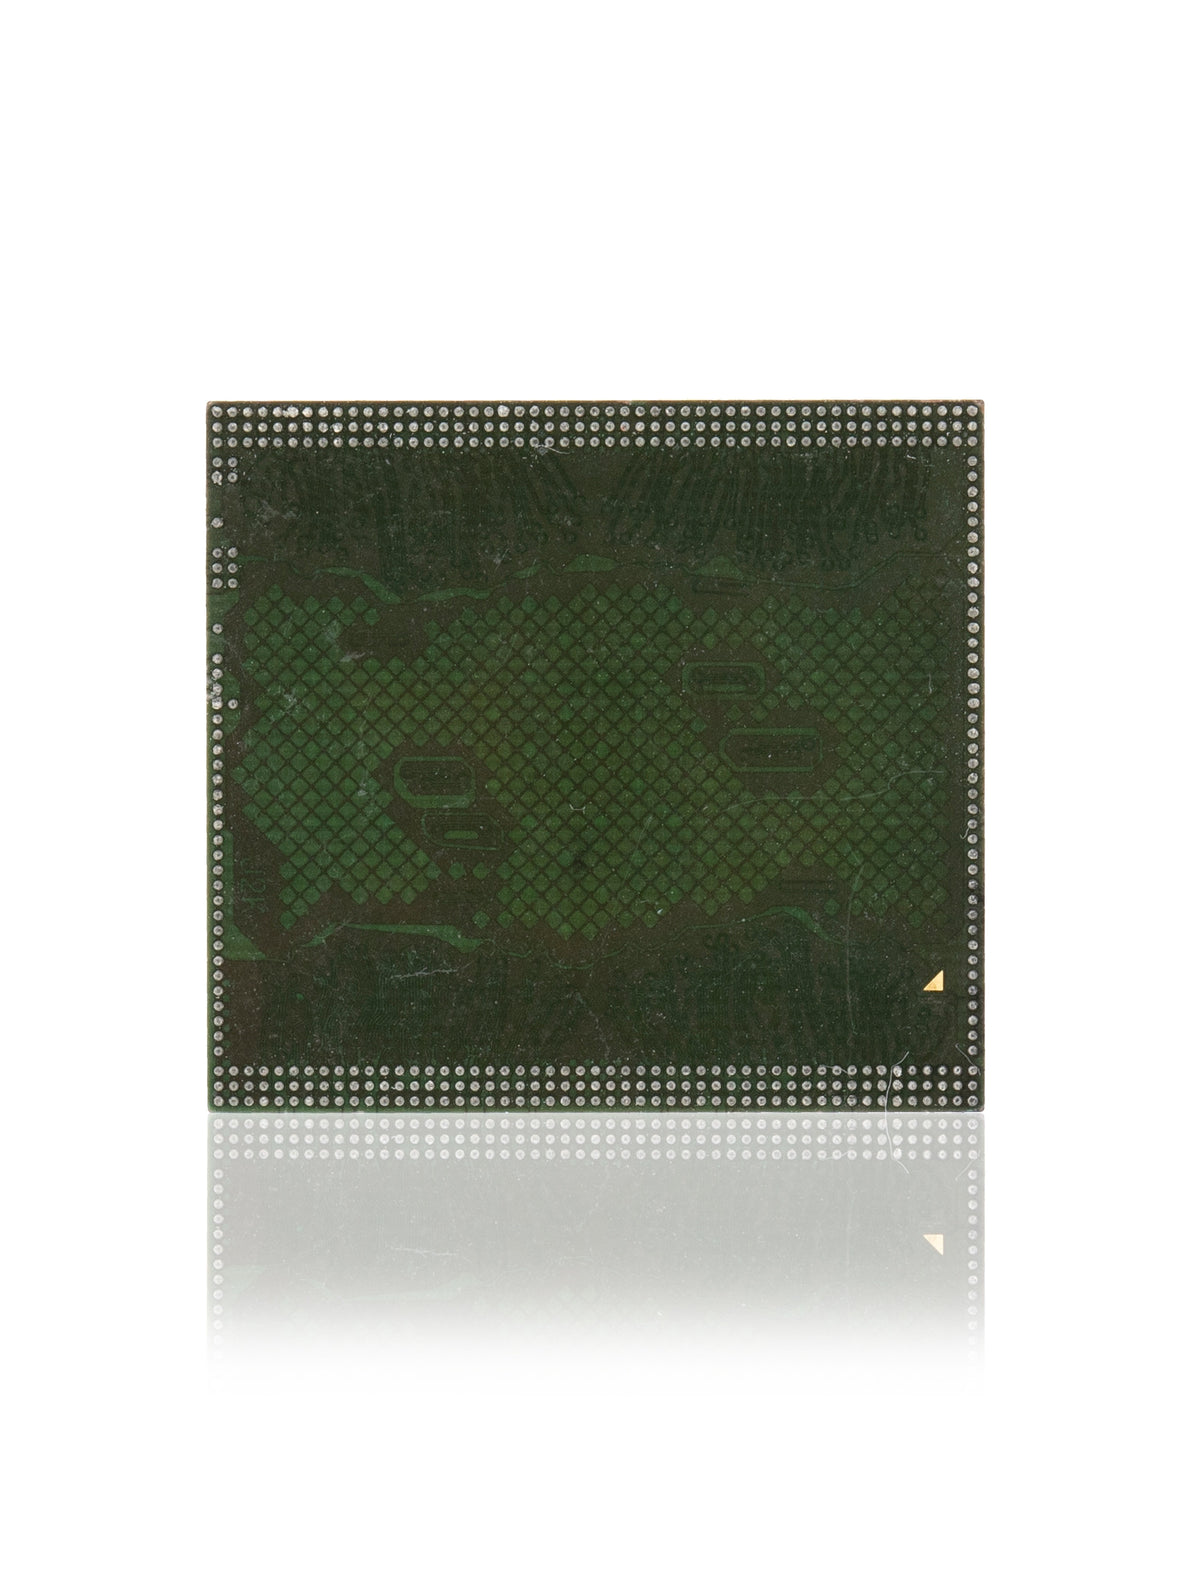 A10 RAM (3GB) COMPATIBLE WITH IPHONE 7 PLUS